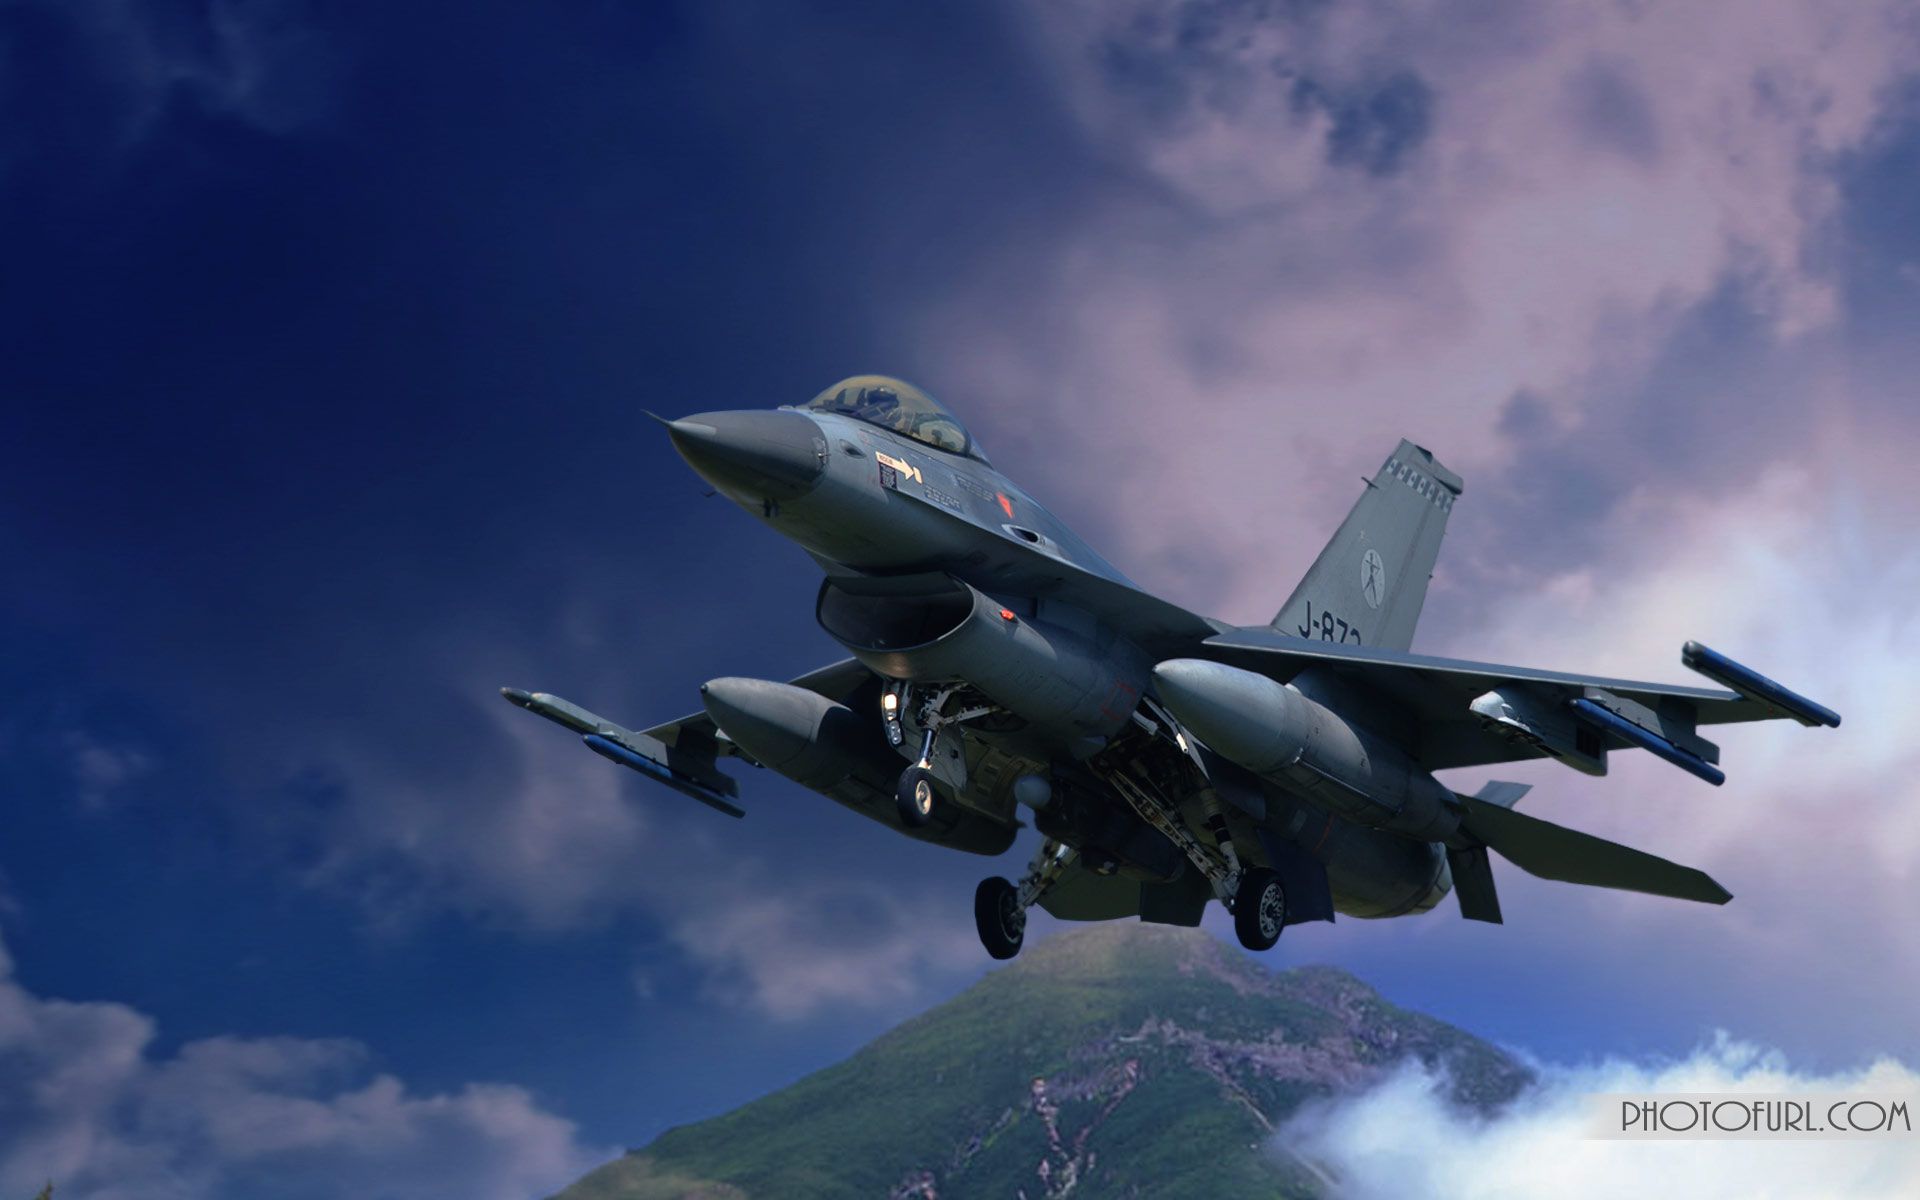 Fighter jets hd wallpapers on wallpapersafari fighter jets fighter fighter planes jets